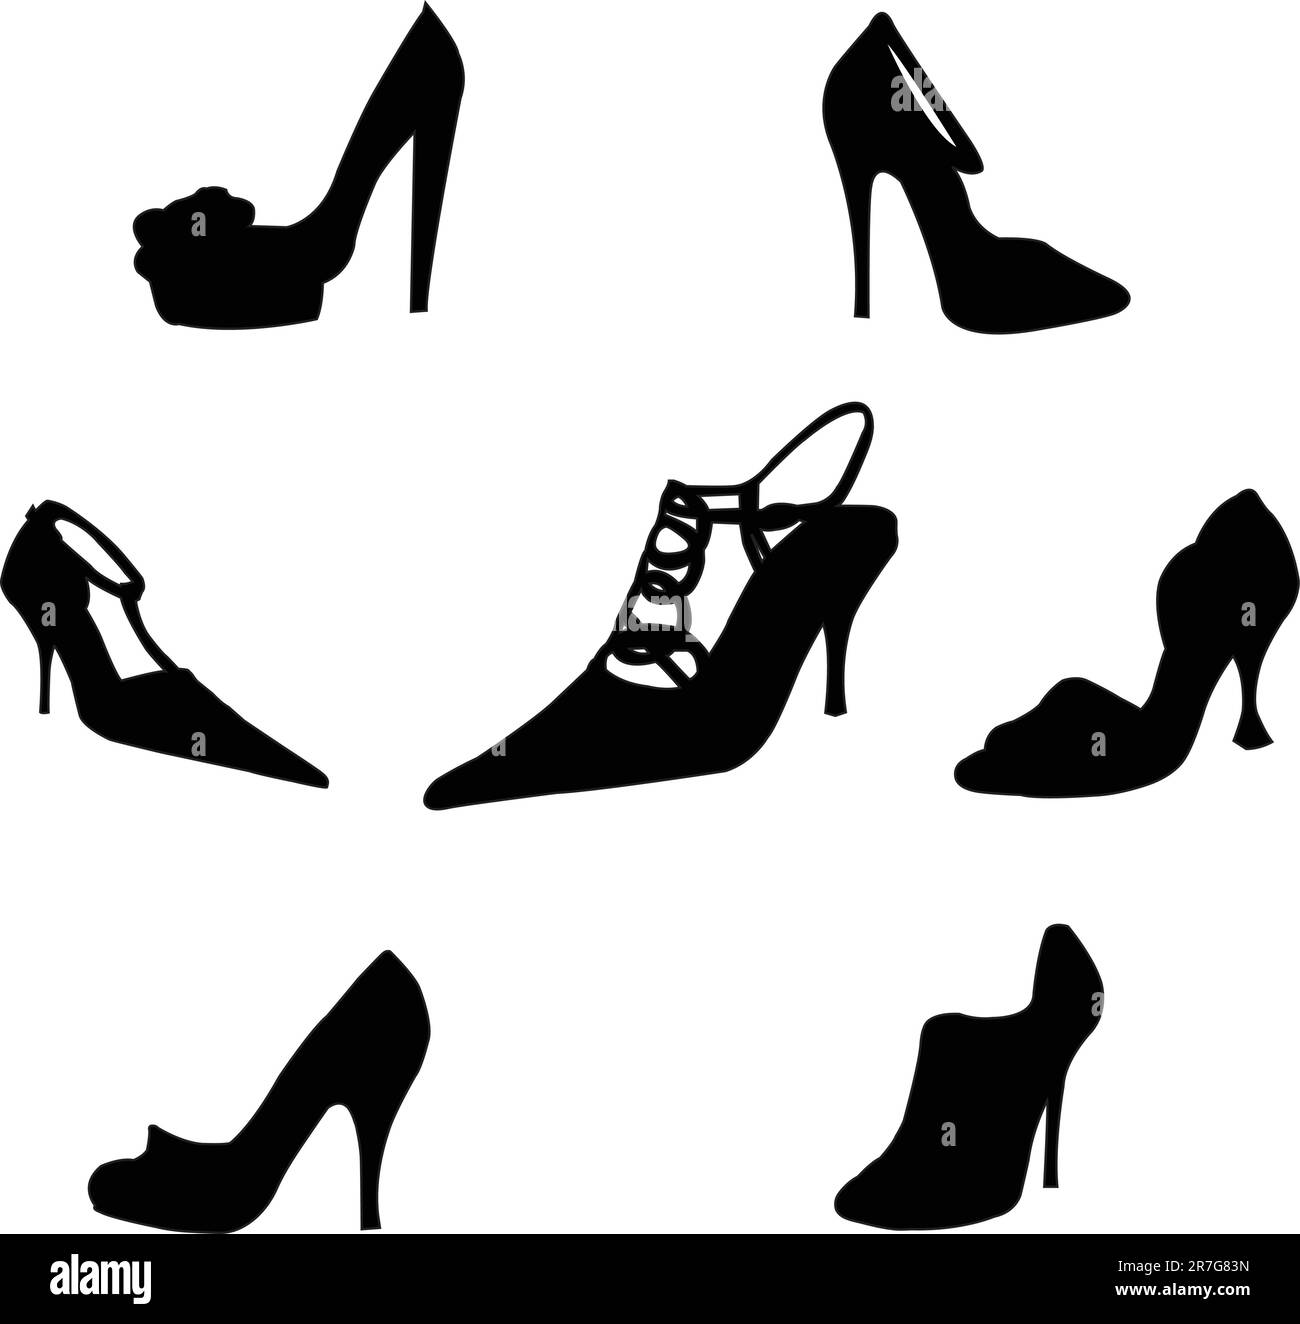 shoes silhouettes - vector Stock Vector